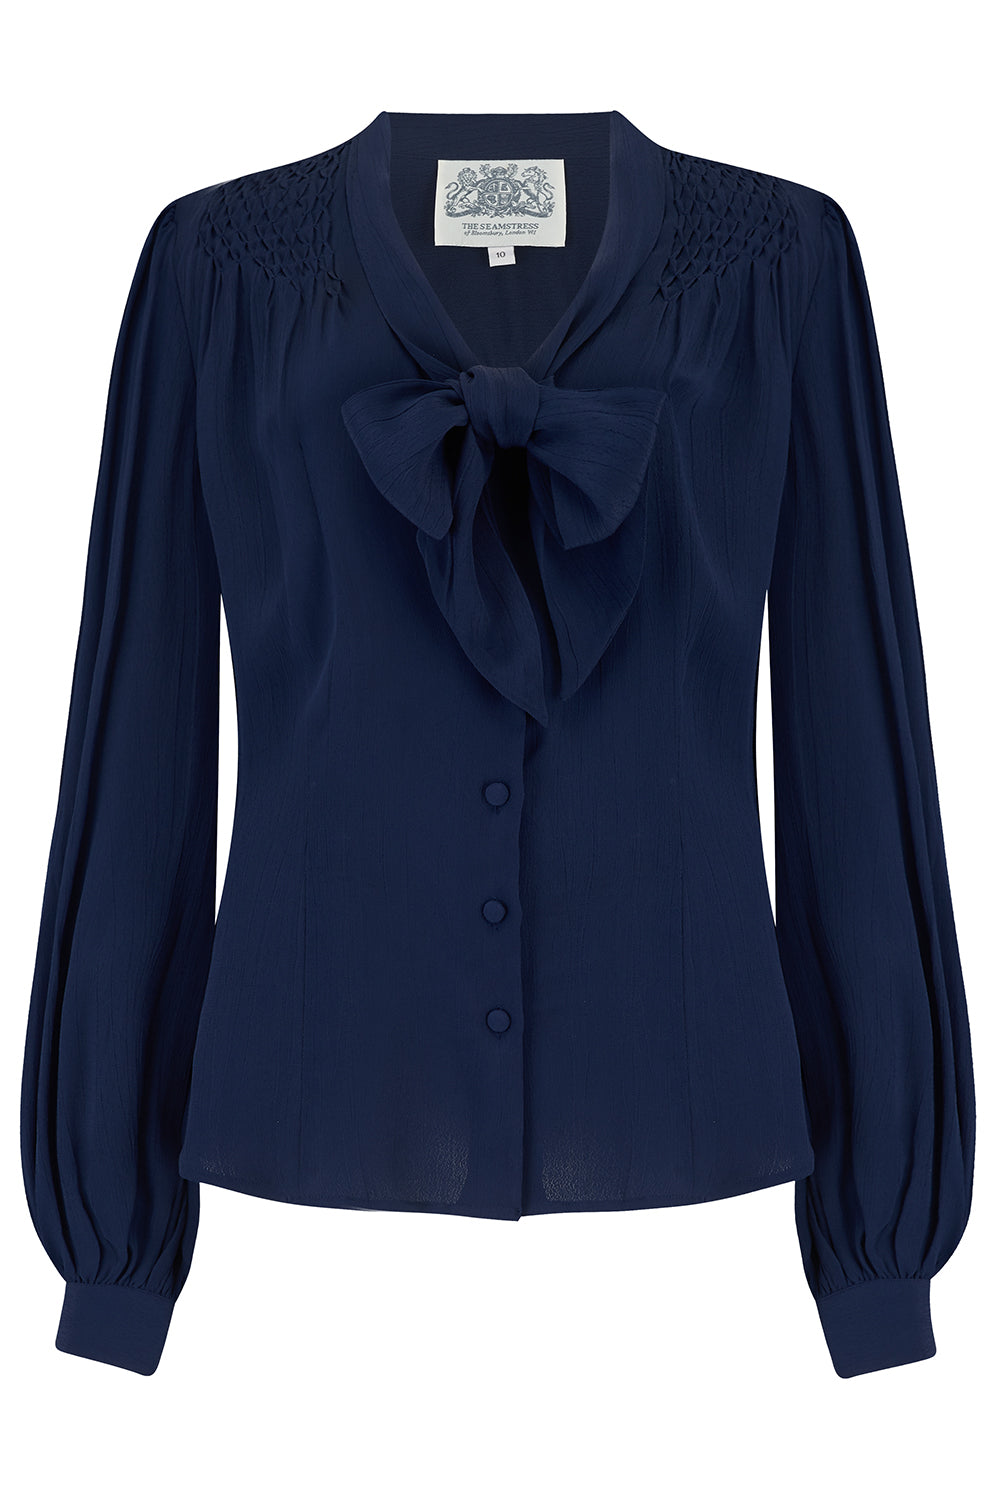 Eva Long Sleeve Blouse in Solid Navy, Authentic & Classic 1940s Vintage Style product